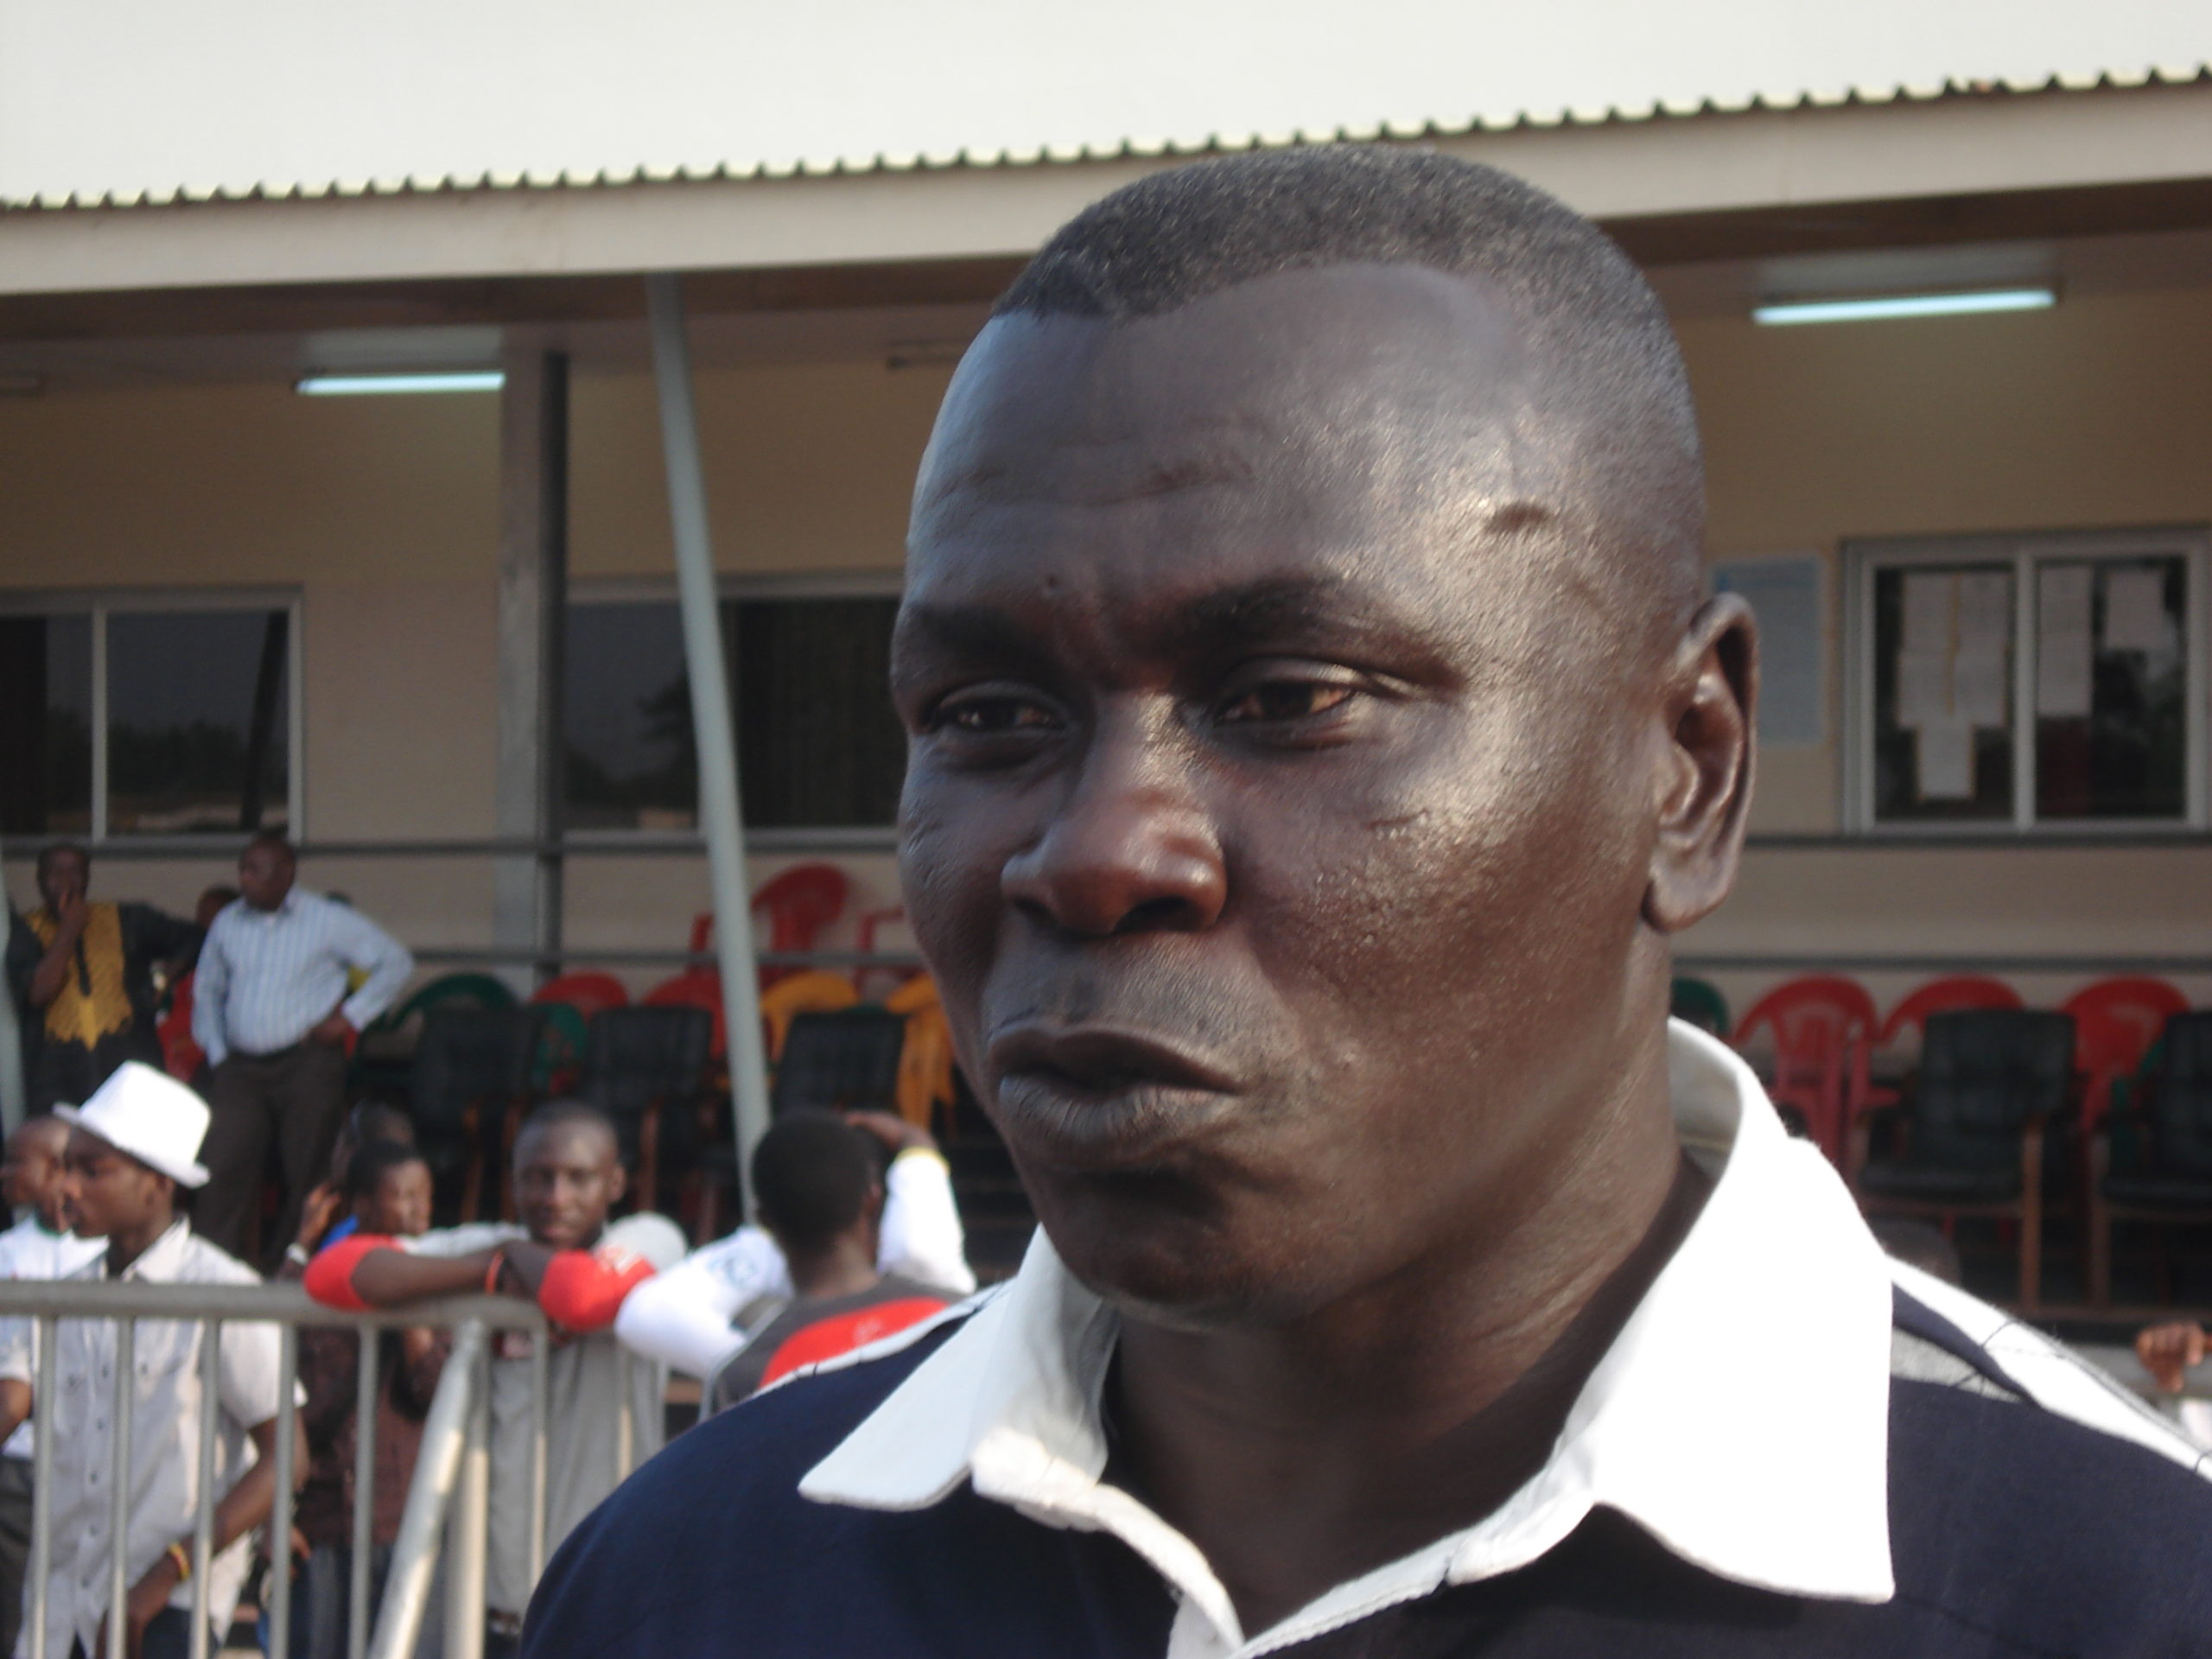 Ghana didn't perform badly at the World Cup - Frimpong Manso